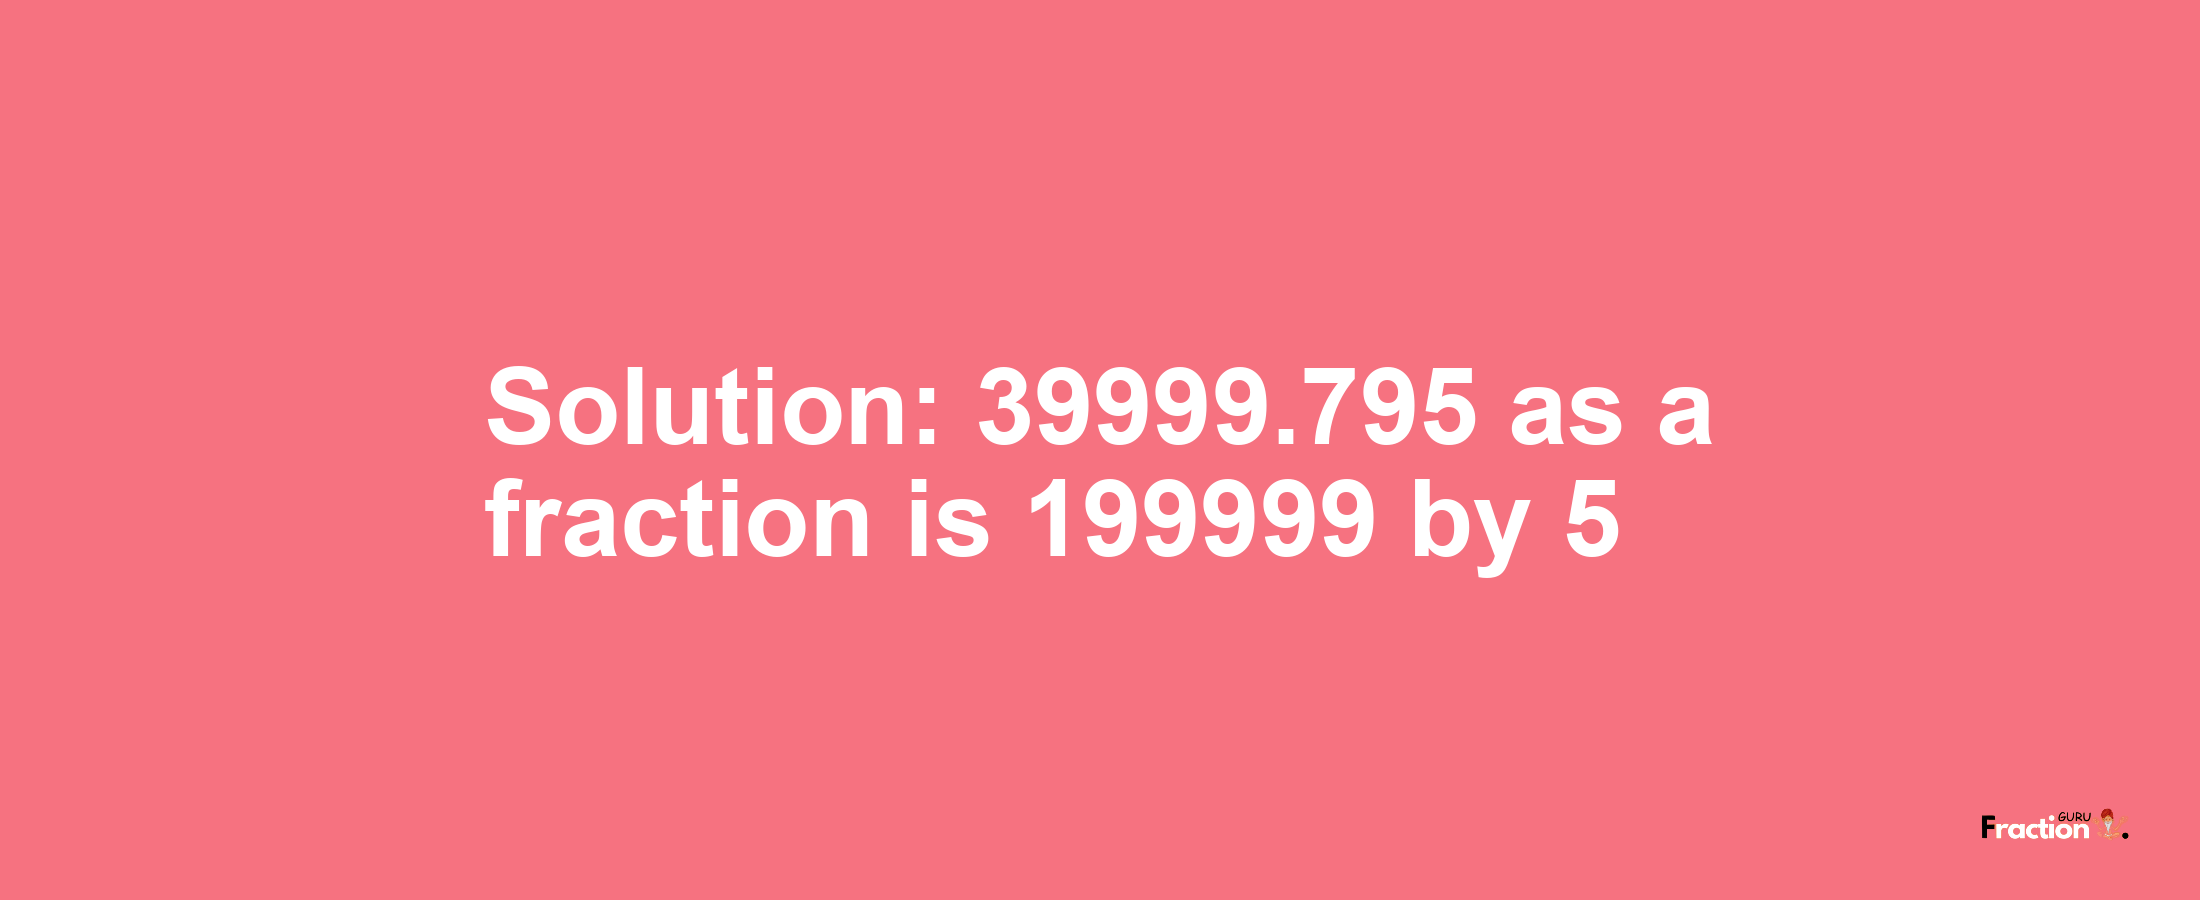 Solution:39999.795 as a fraction is 199999/5